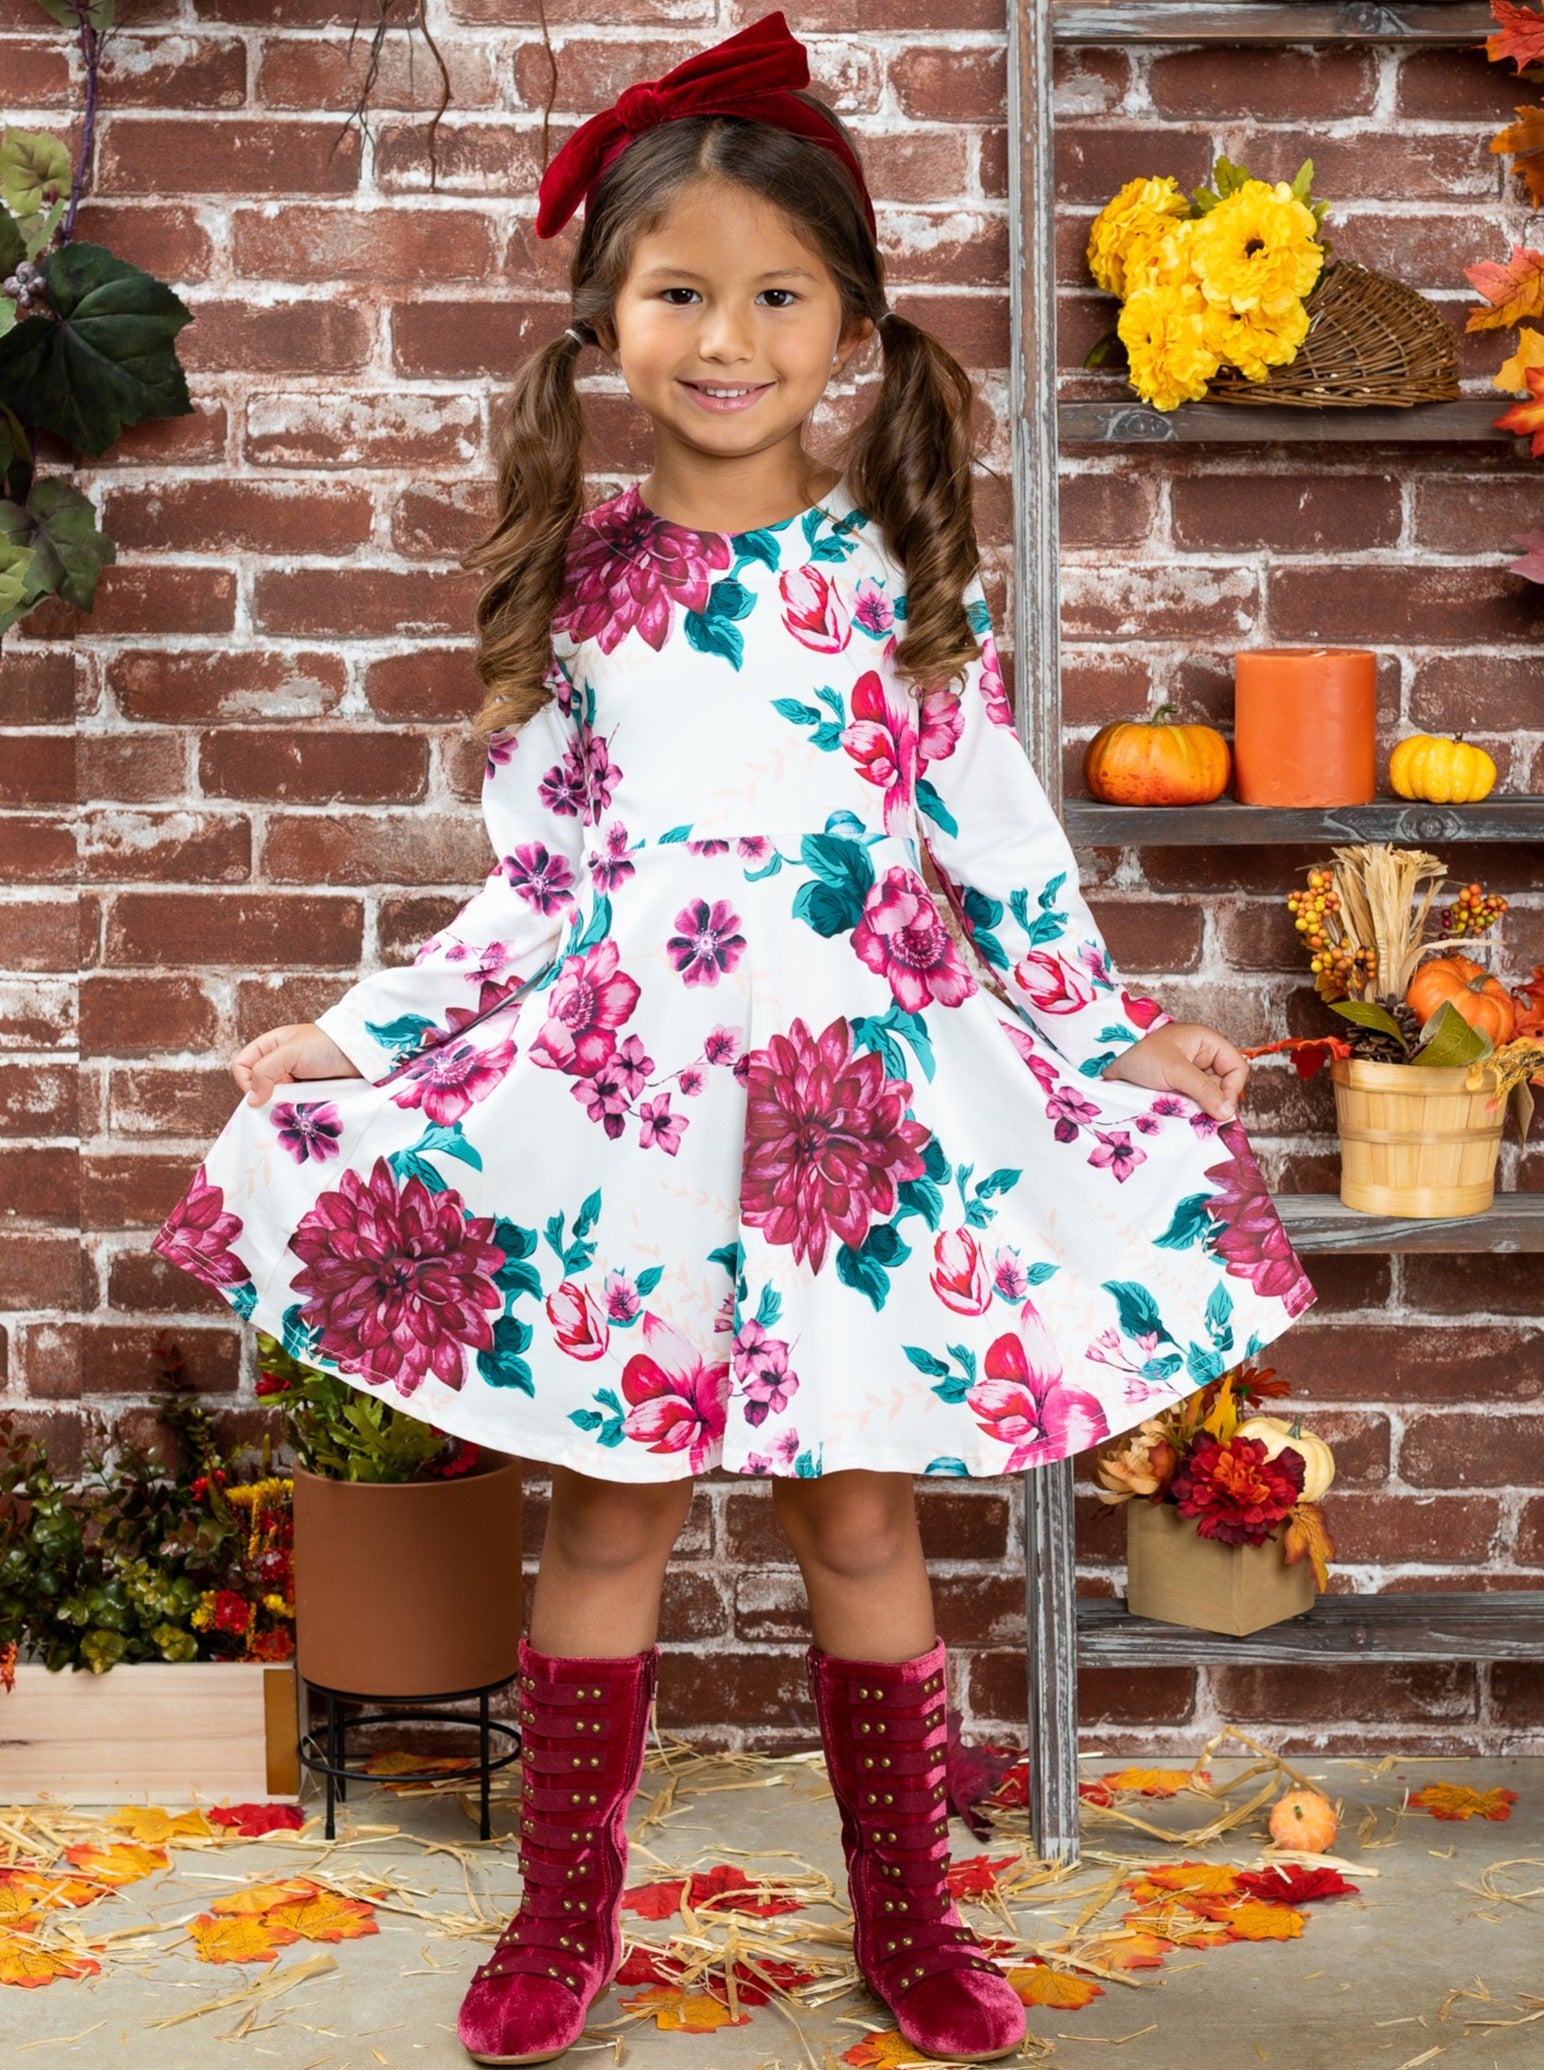 Mia Belle Girls Long Sleeve Floral Lace Dress